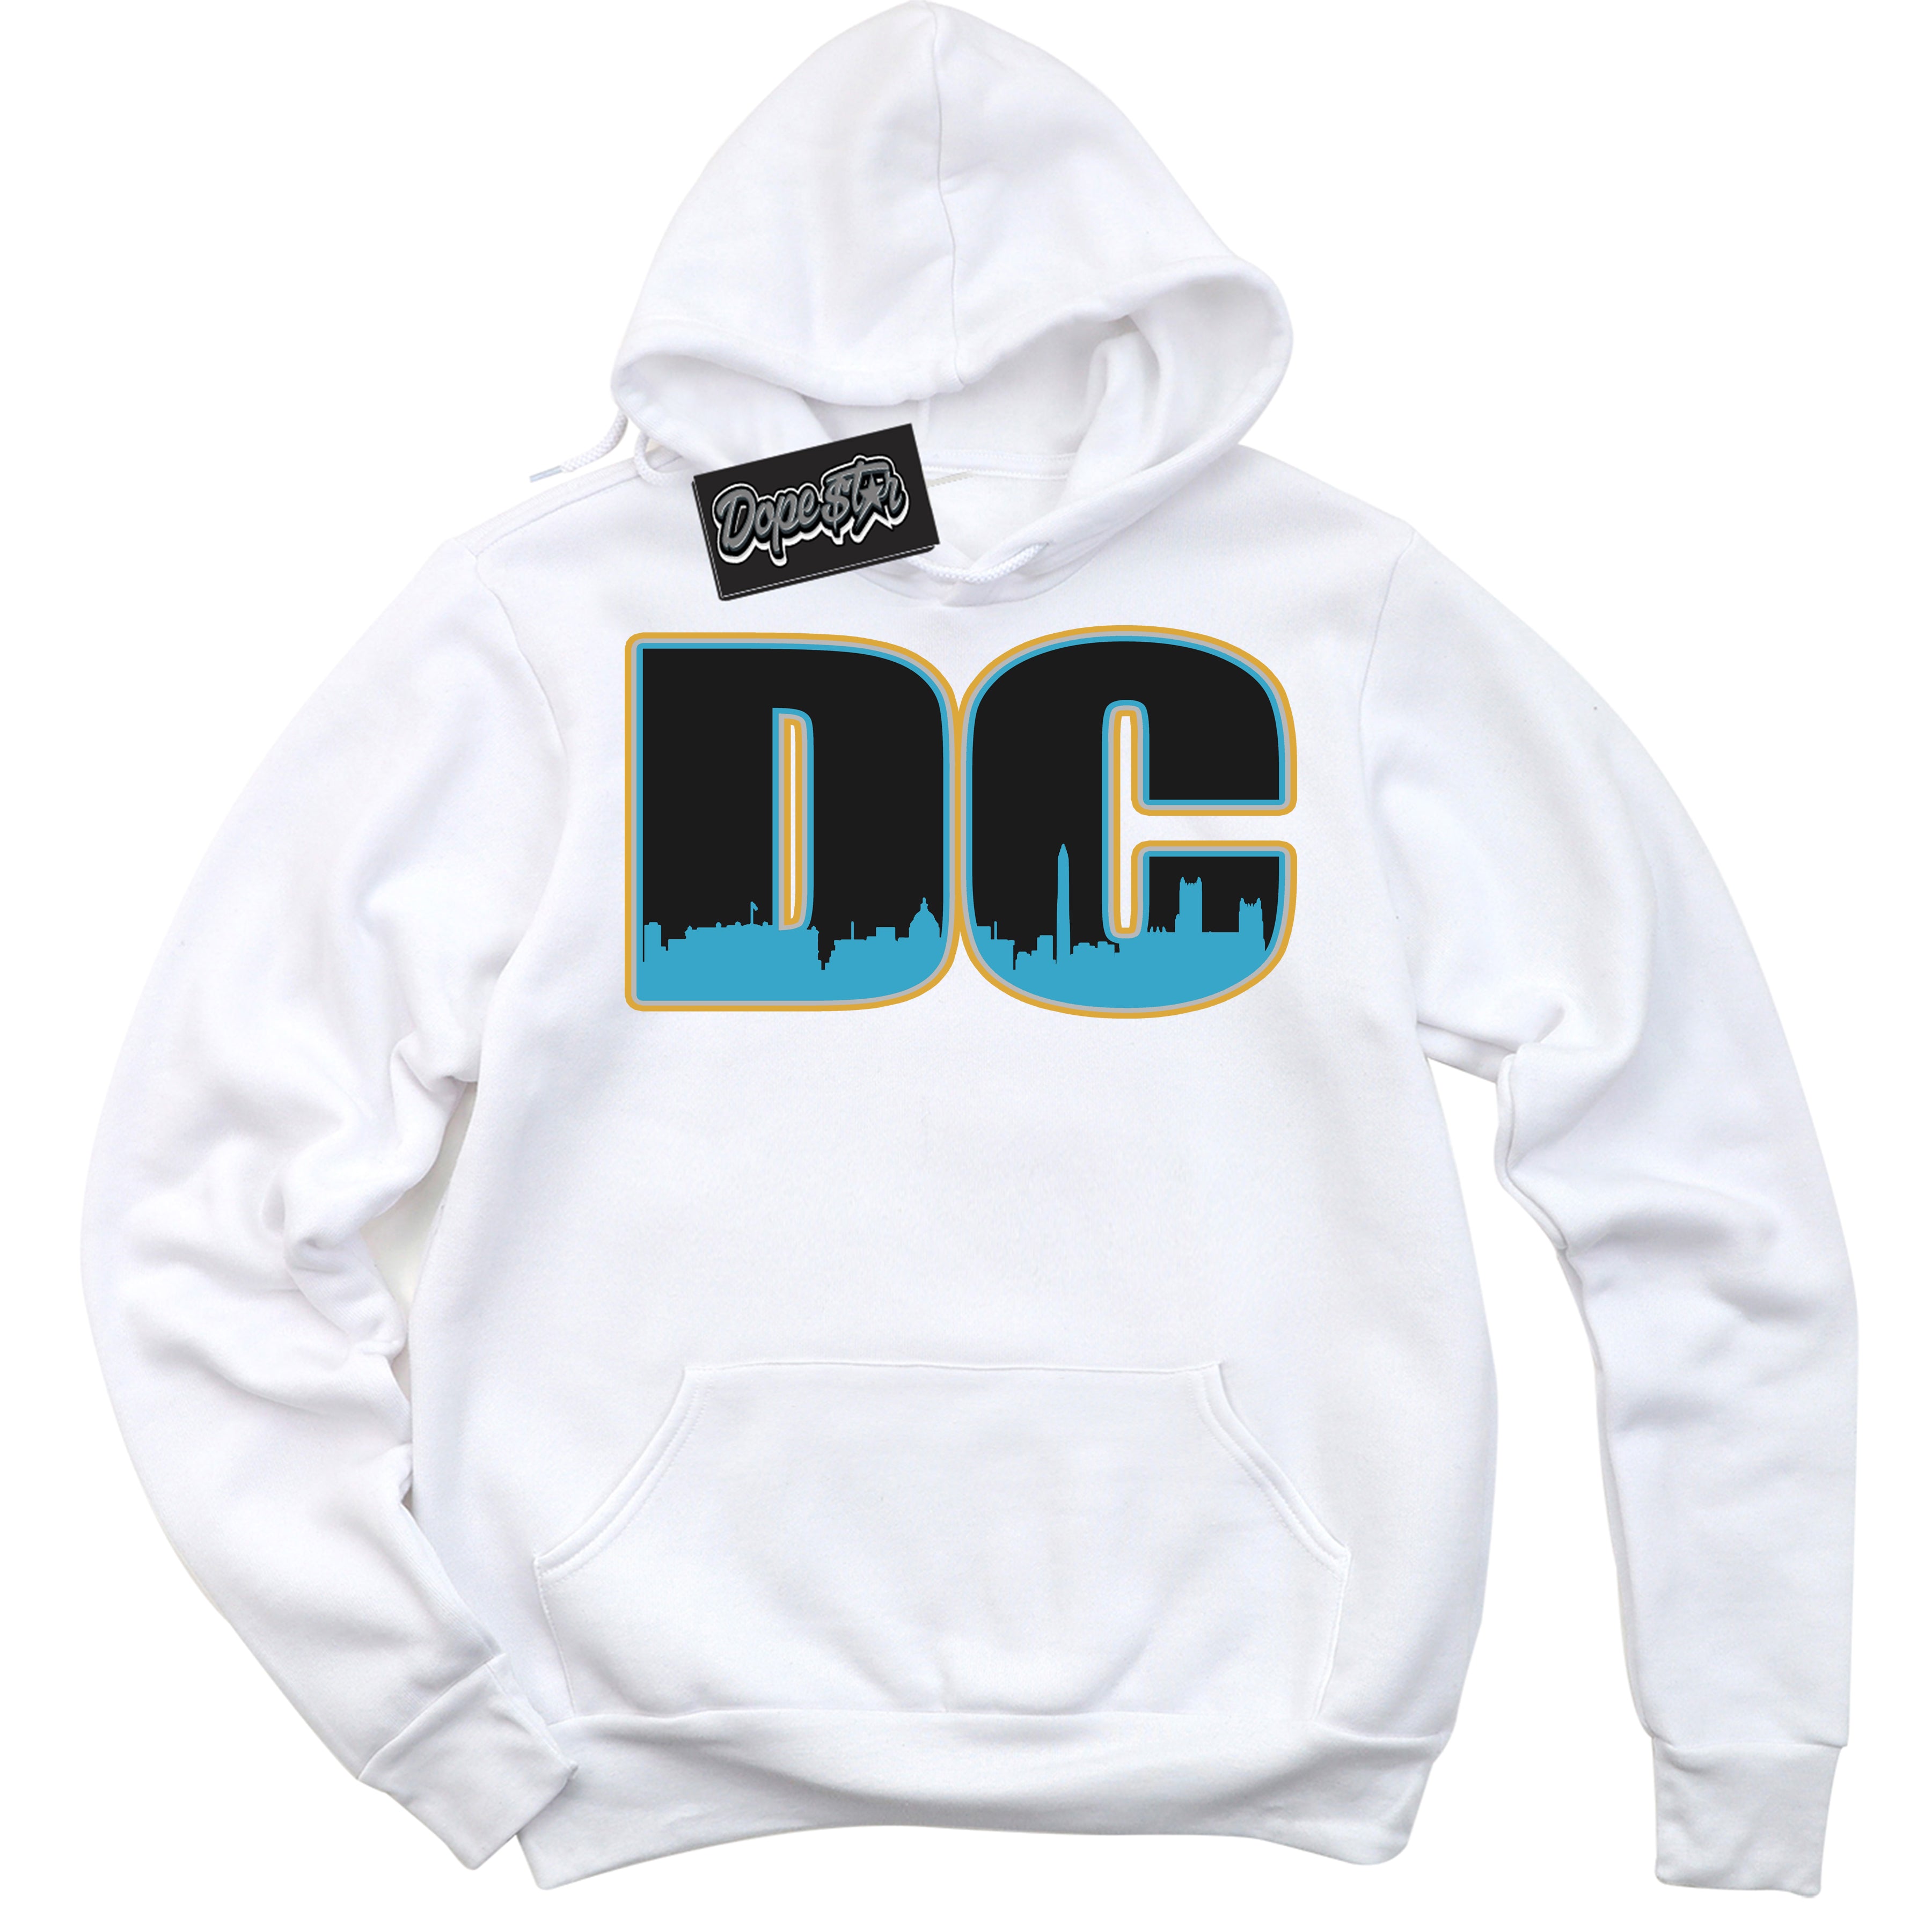 Cool White Hoodie with “ DC ”  design that Perfectly Matches Aqua 5s Sneakers.